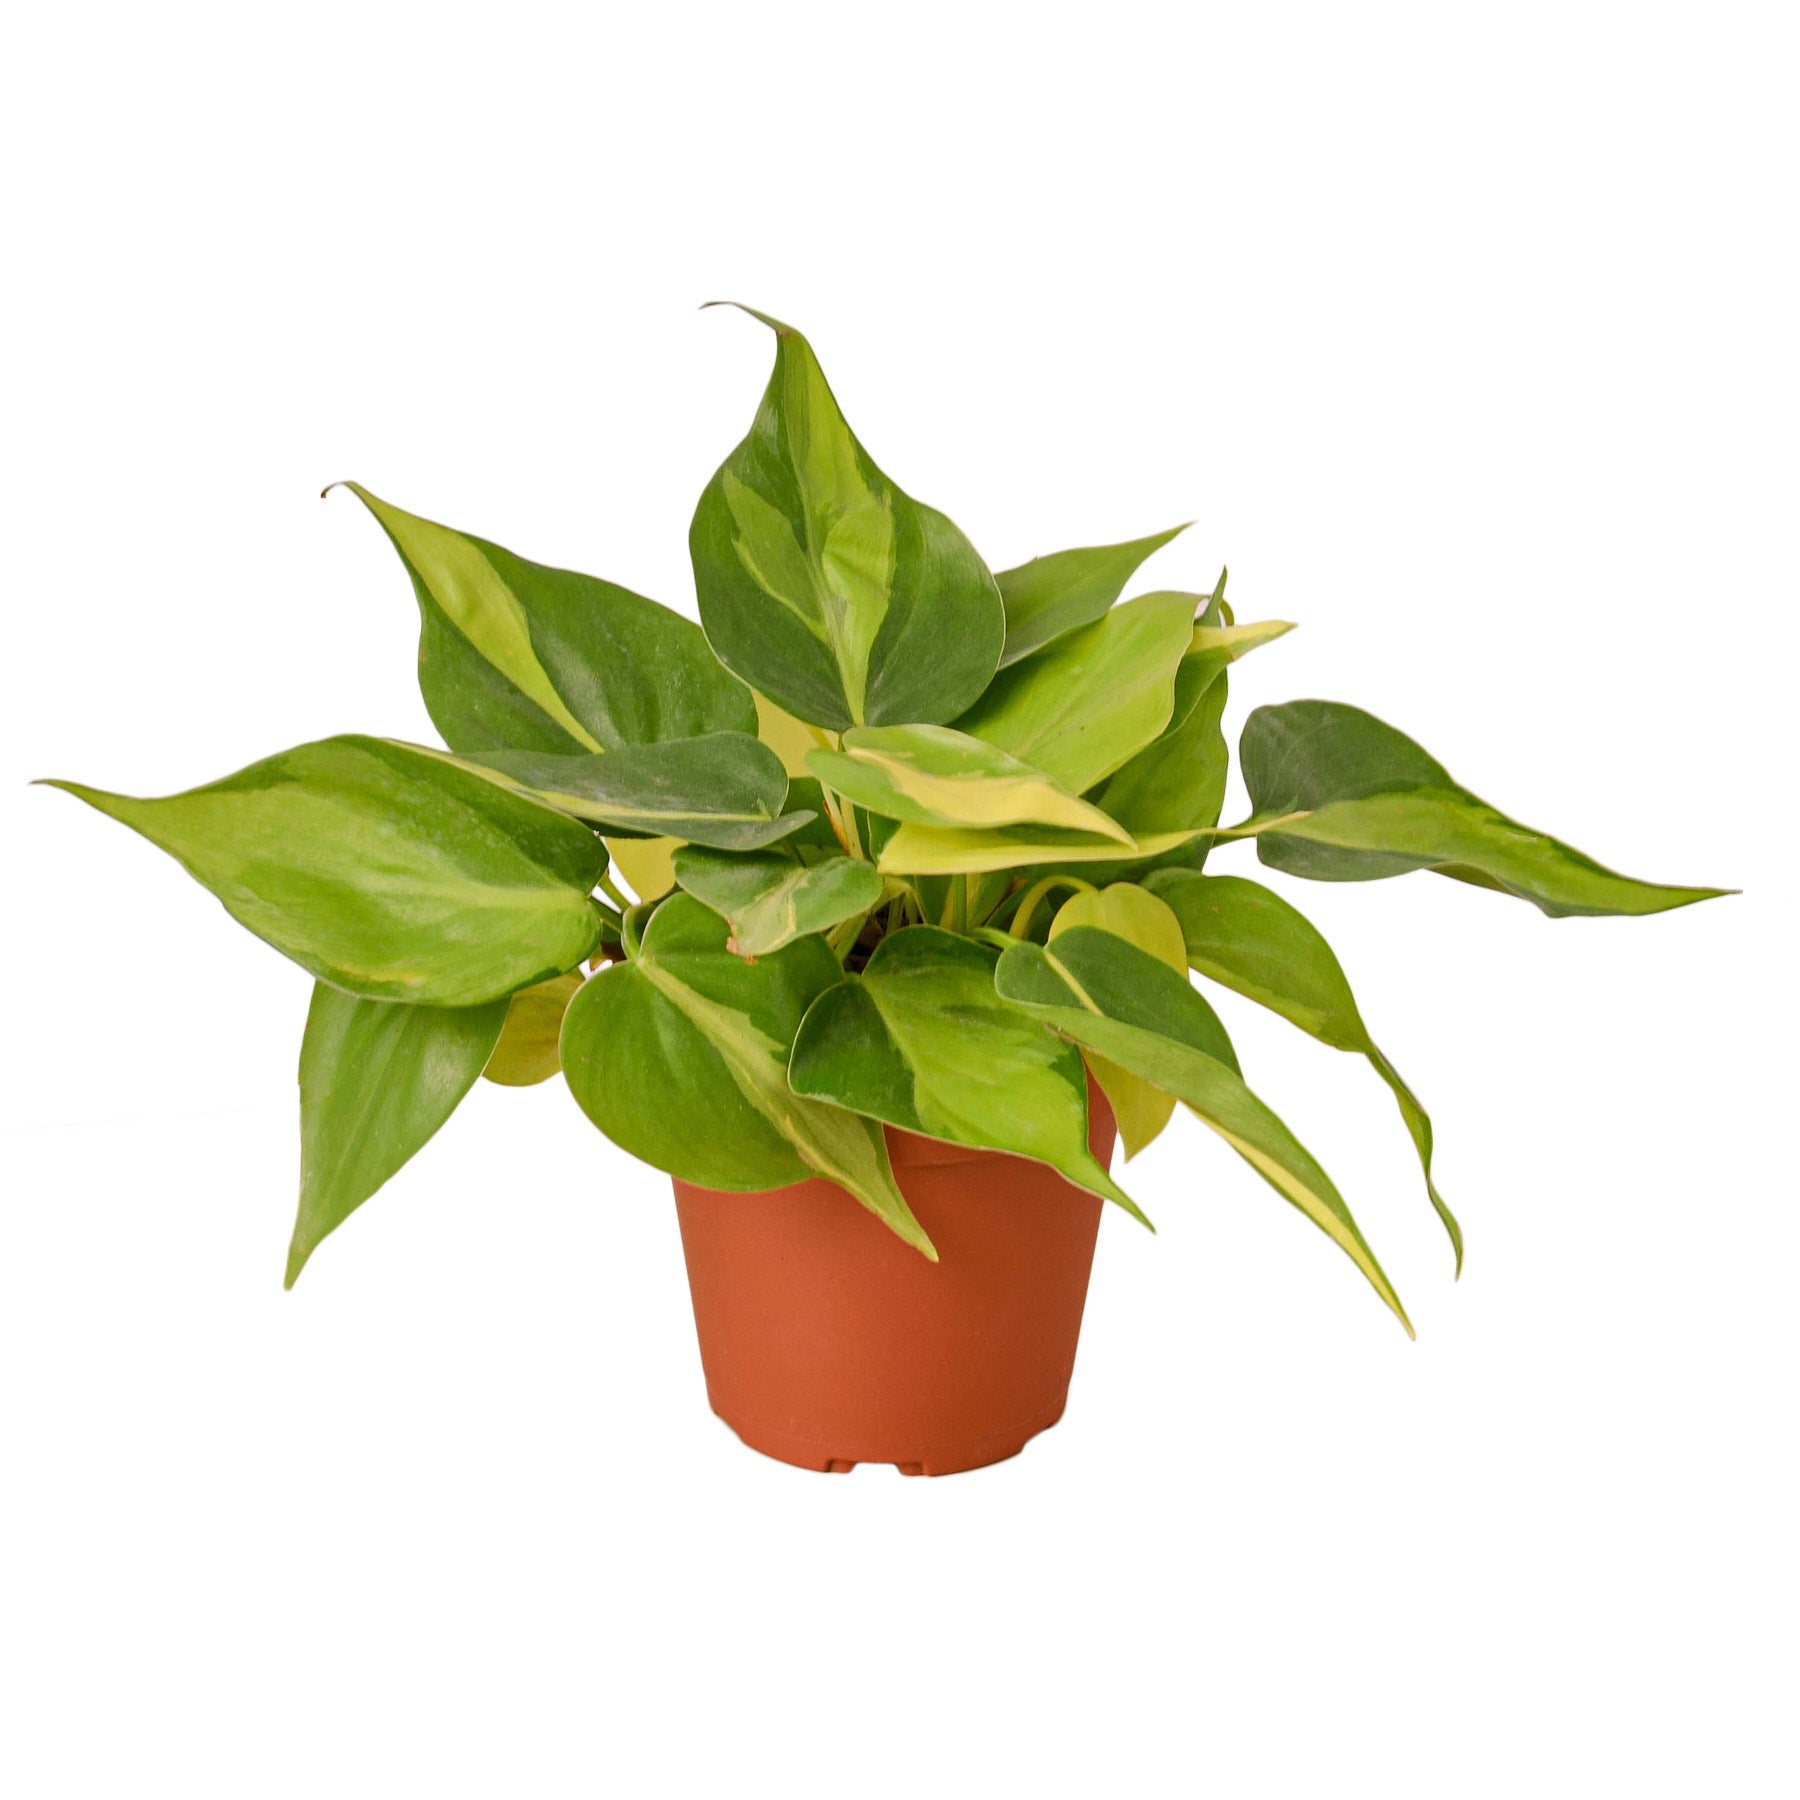 A potted plant with green leaves on a white background available at a garden center near me.